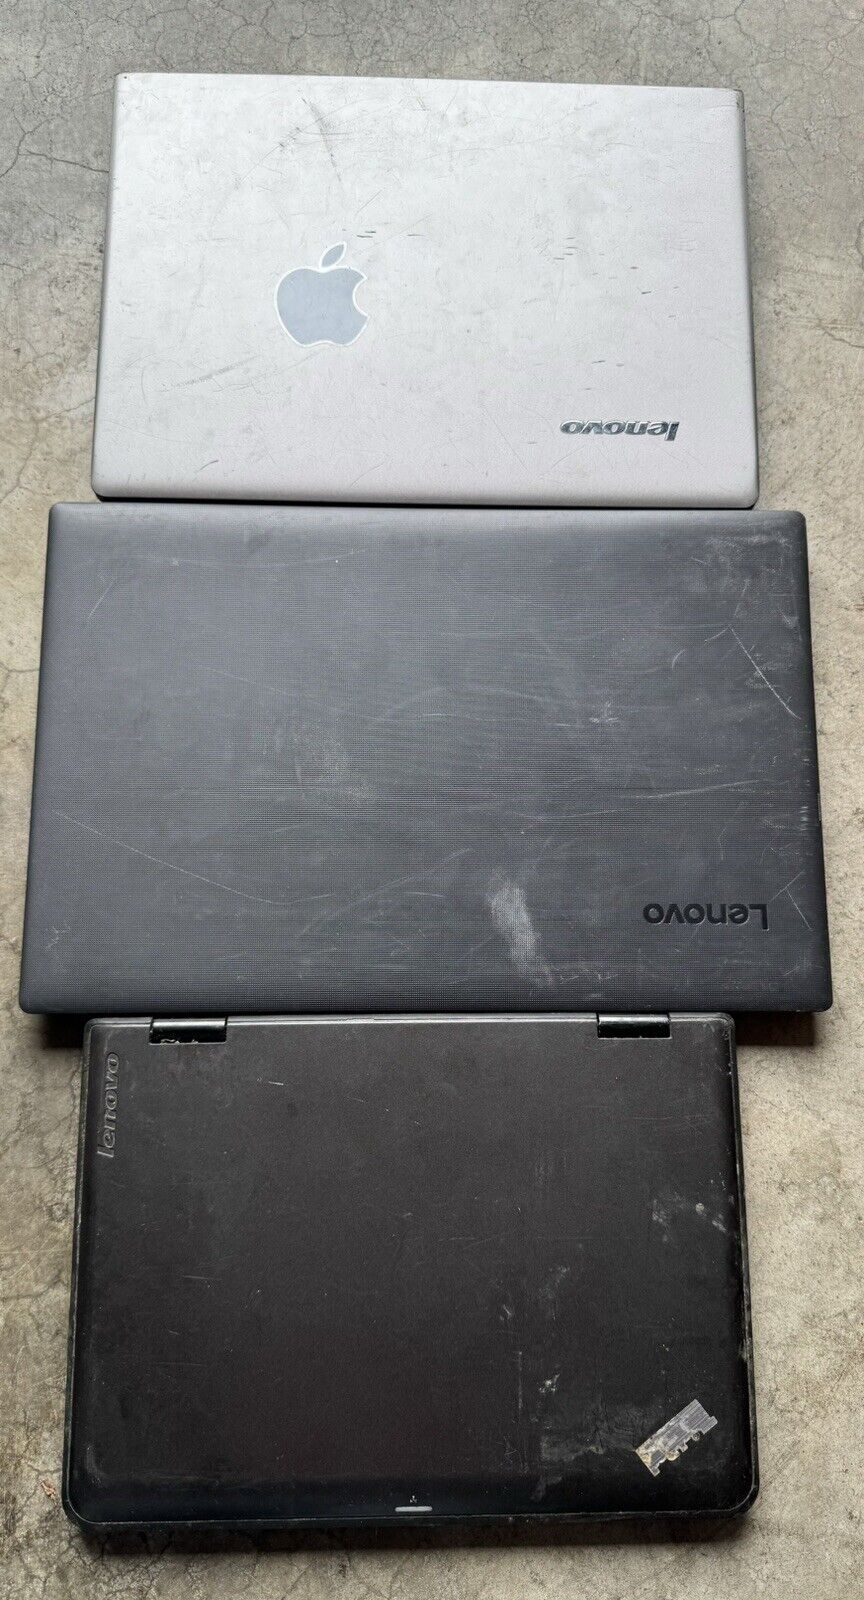 Lot of 3 laptops - 3x Lenovo Untested As Is